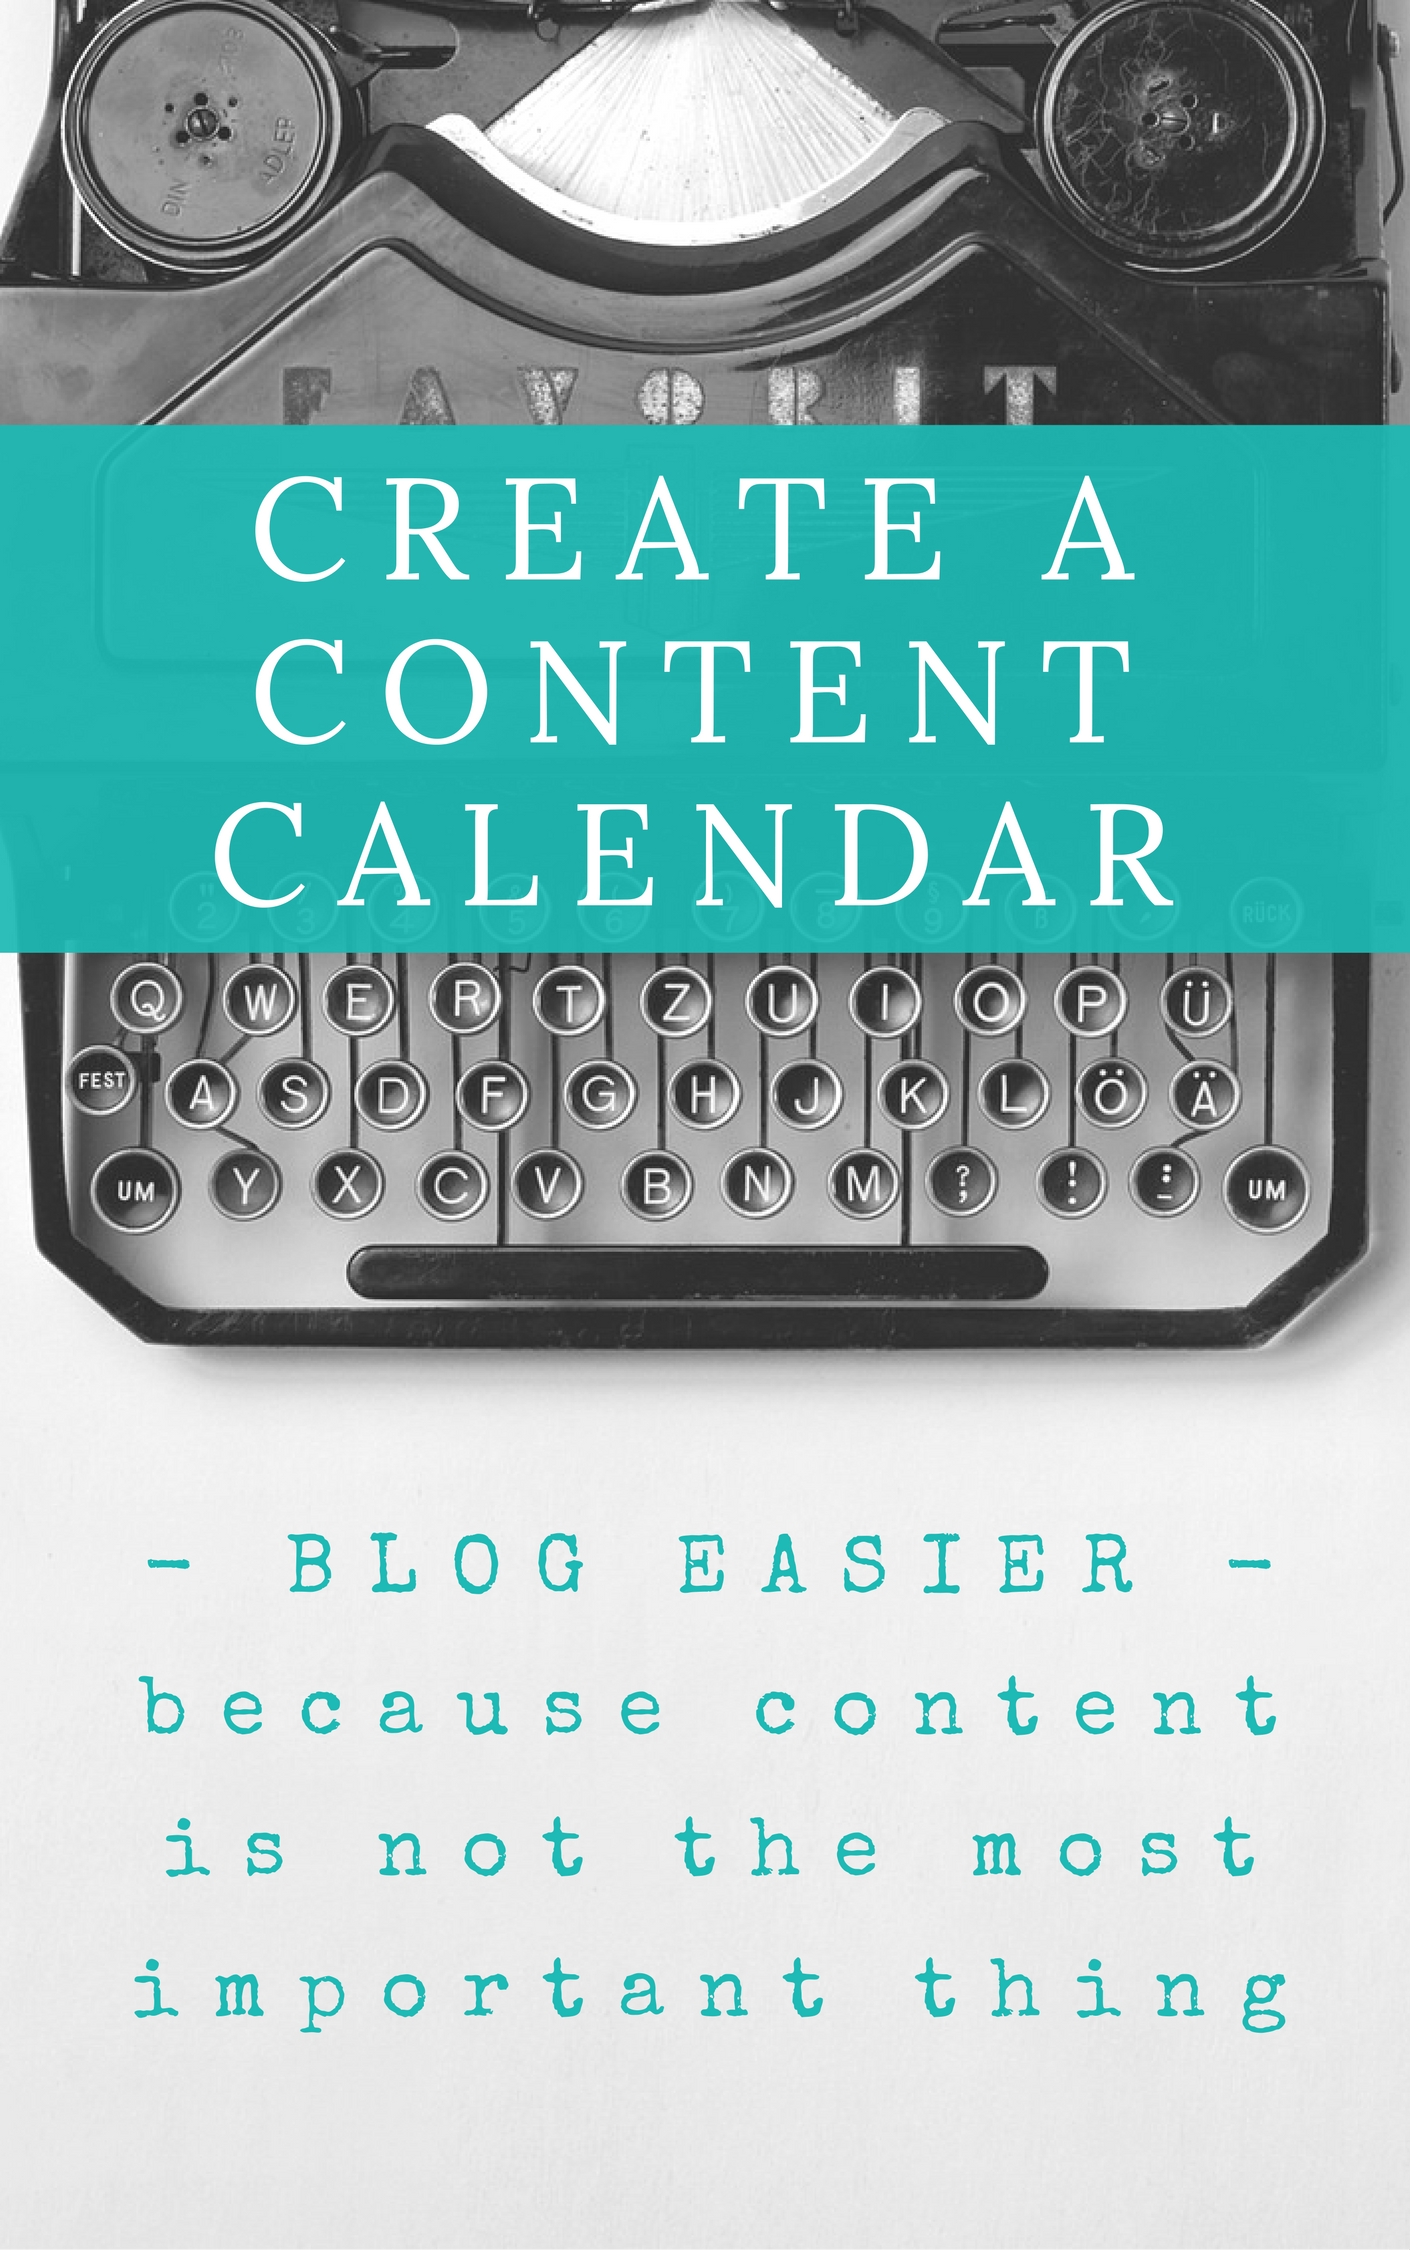 create-a-content-calendar-free-4-day-challenge